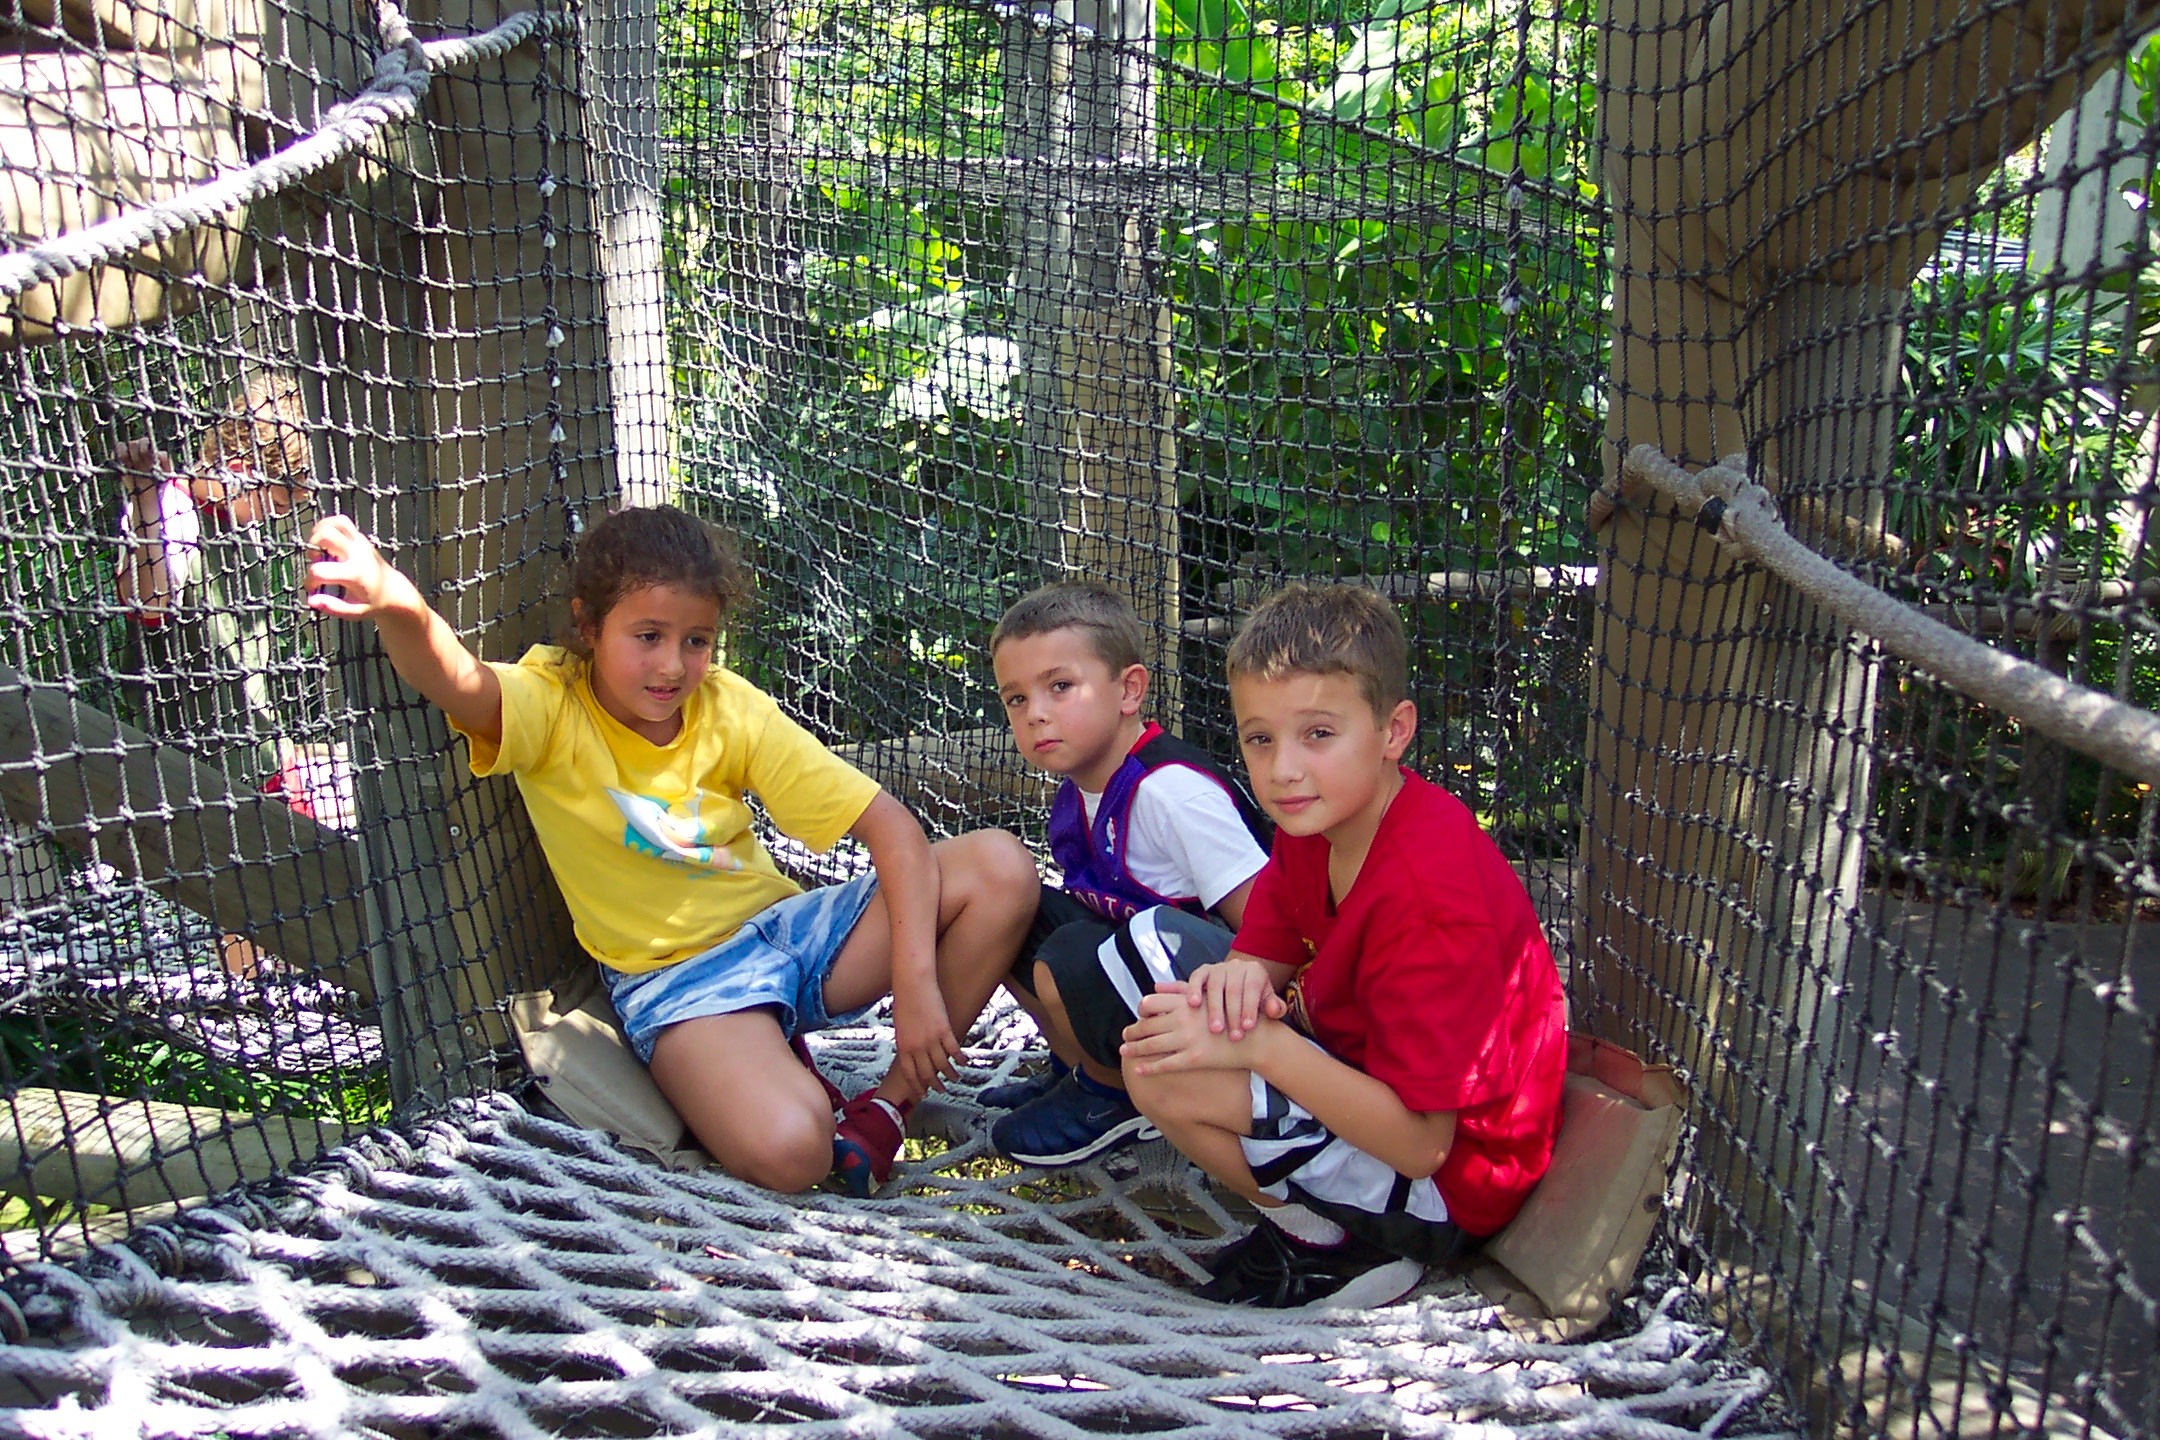 Anna, Jacob, and David on a hanging bridge in Jurassic Park at Adventure Island